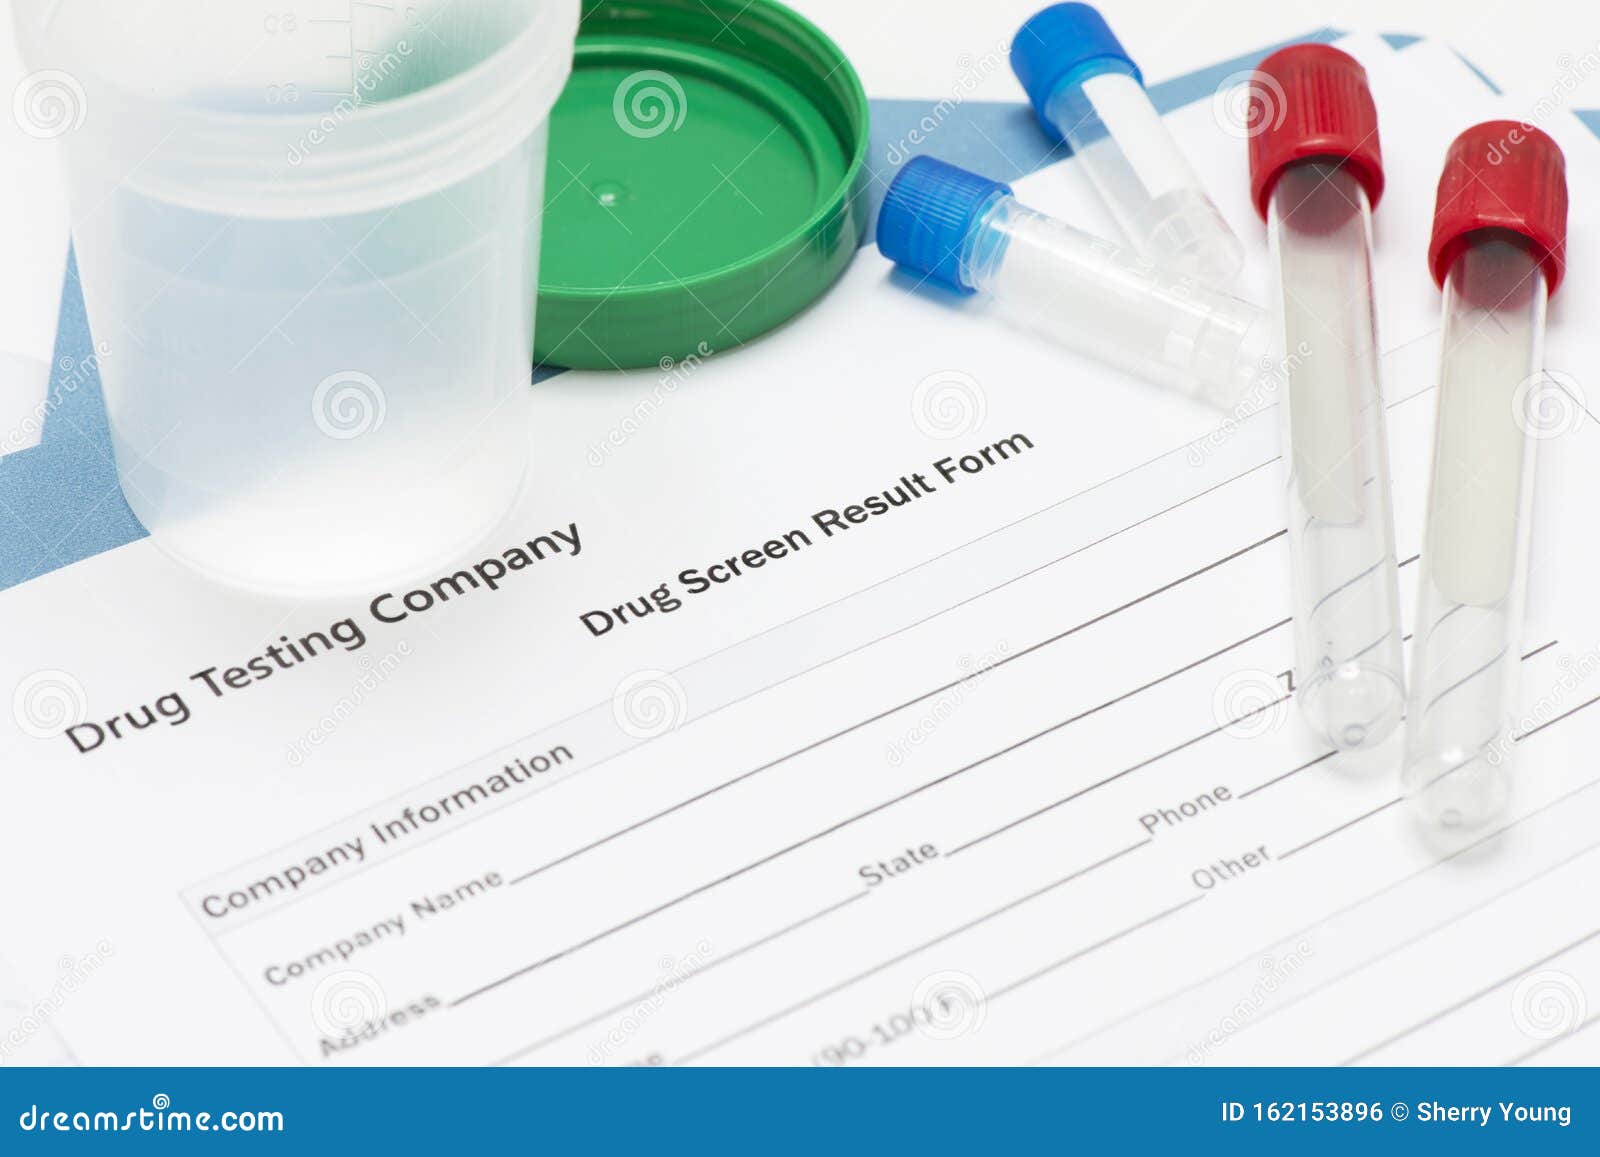 drug screen form with containers